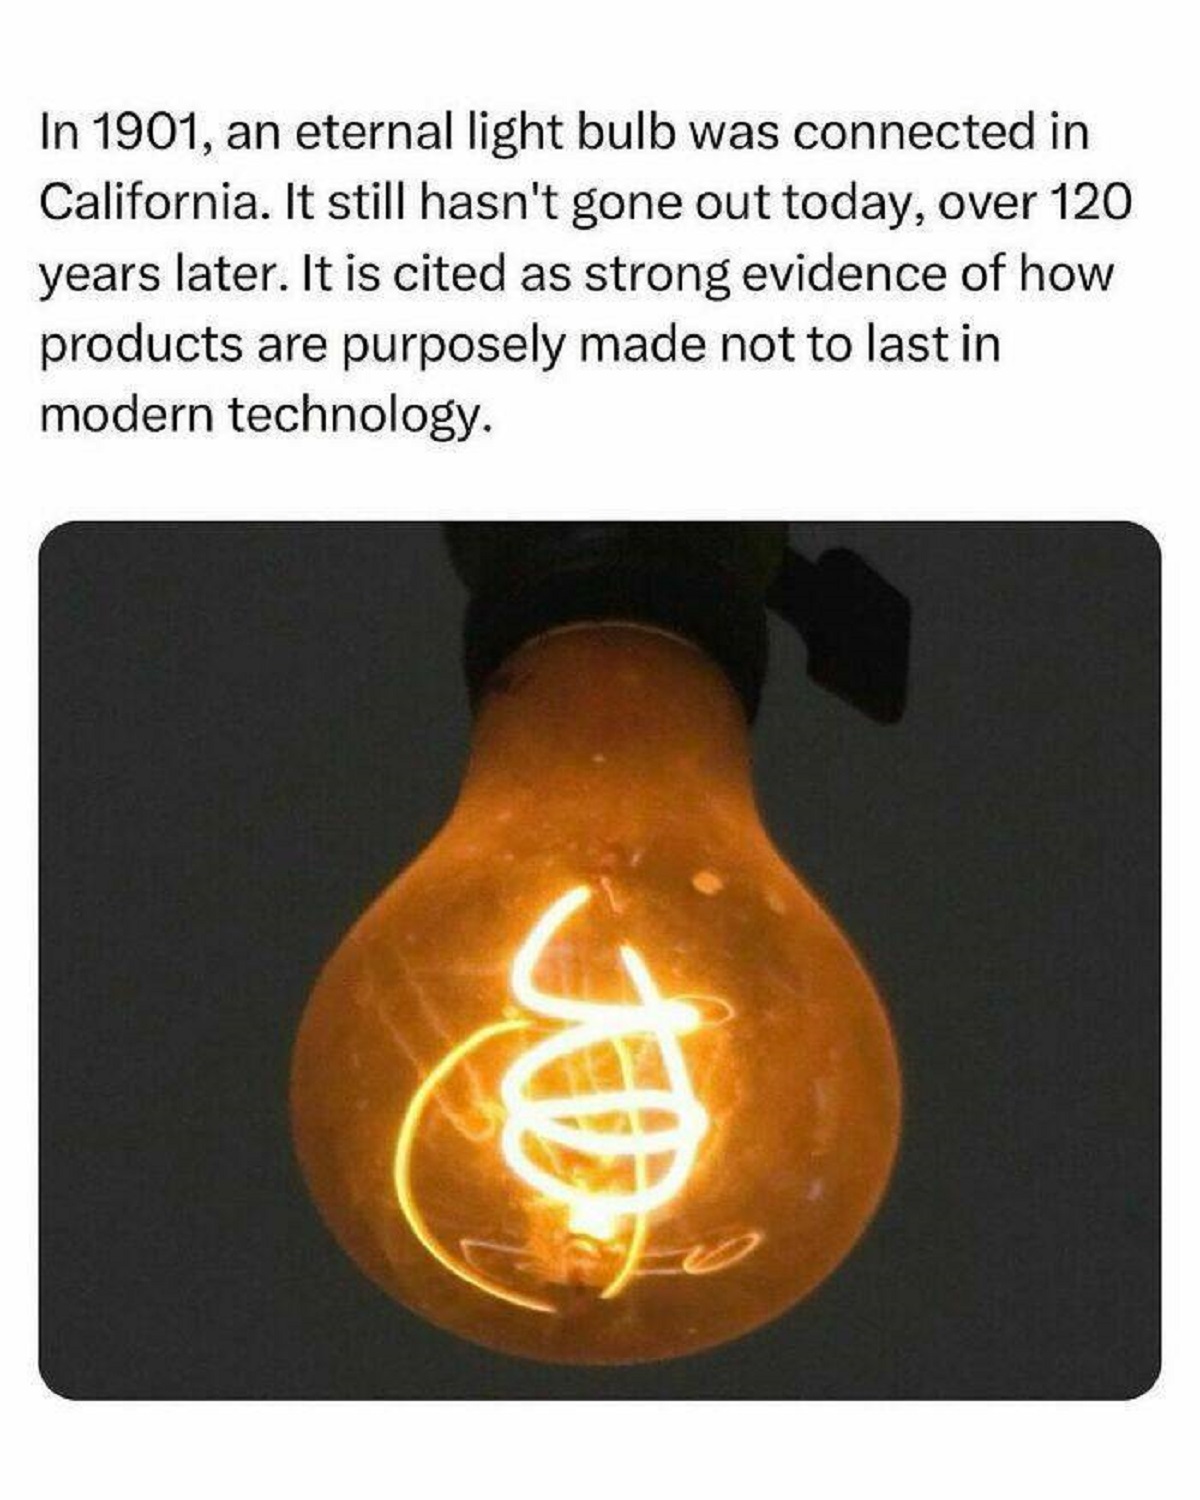 centennial light bulb - In 1901, an eternal light bulb was connected in California. It still hasn't gone out today, over 120 years later. It is cited as strong evidence of how products are purposely made not to last in modern technology.